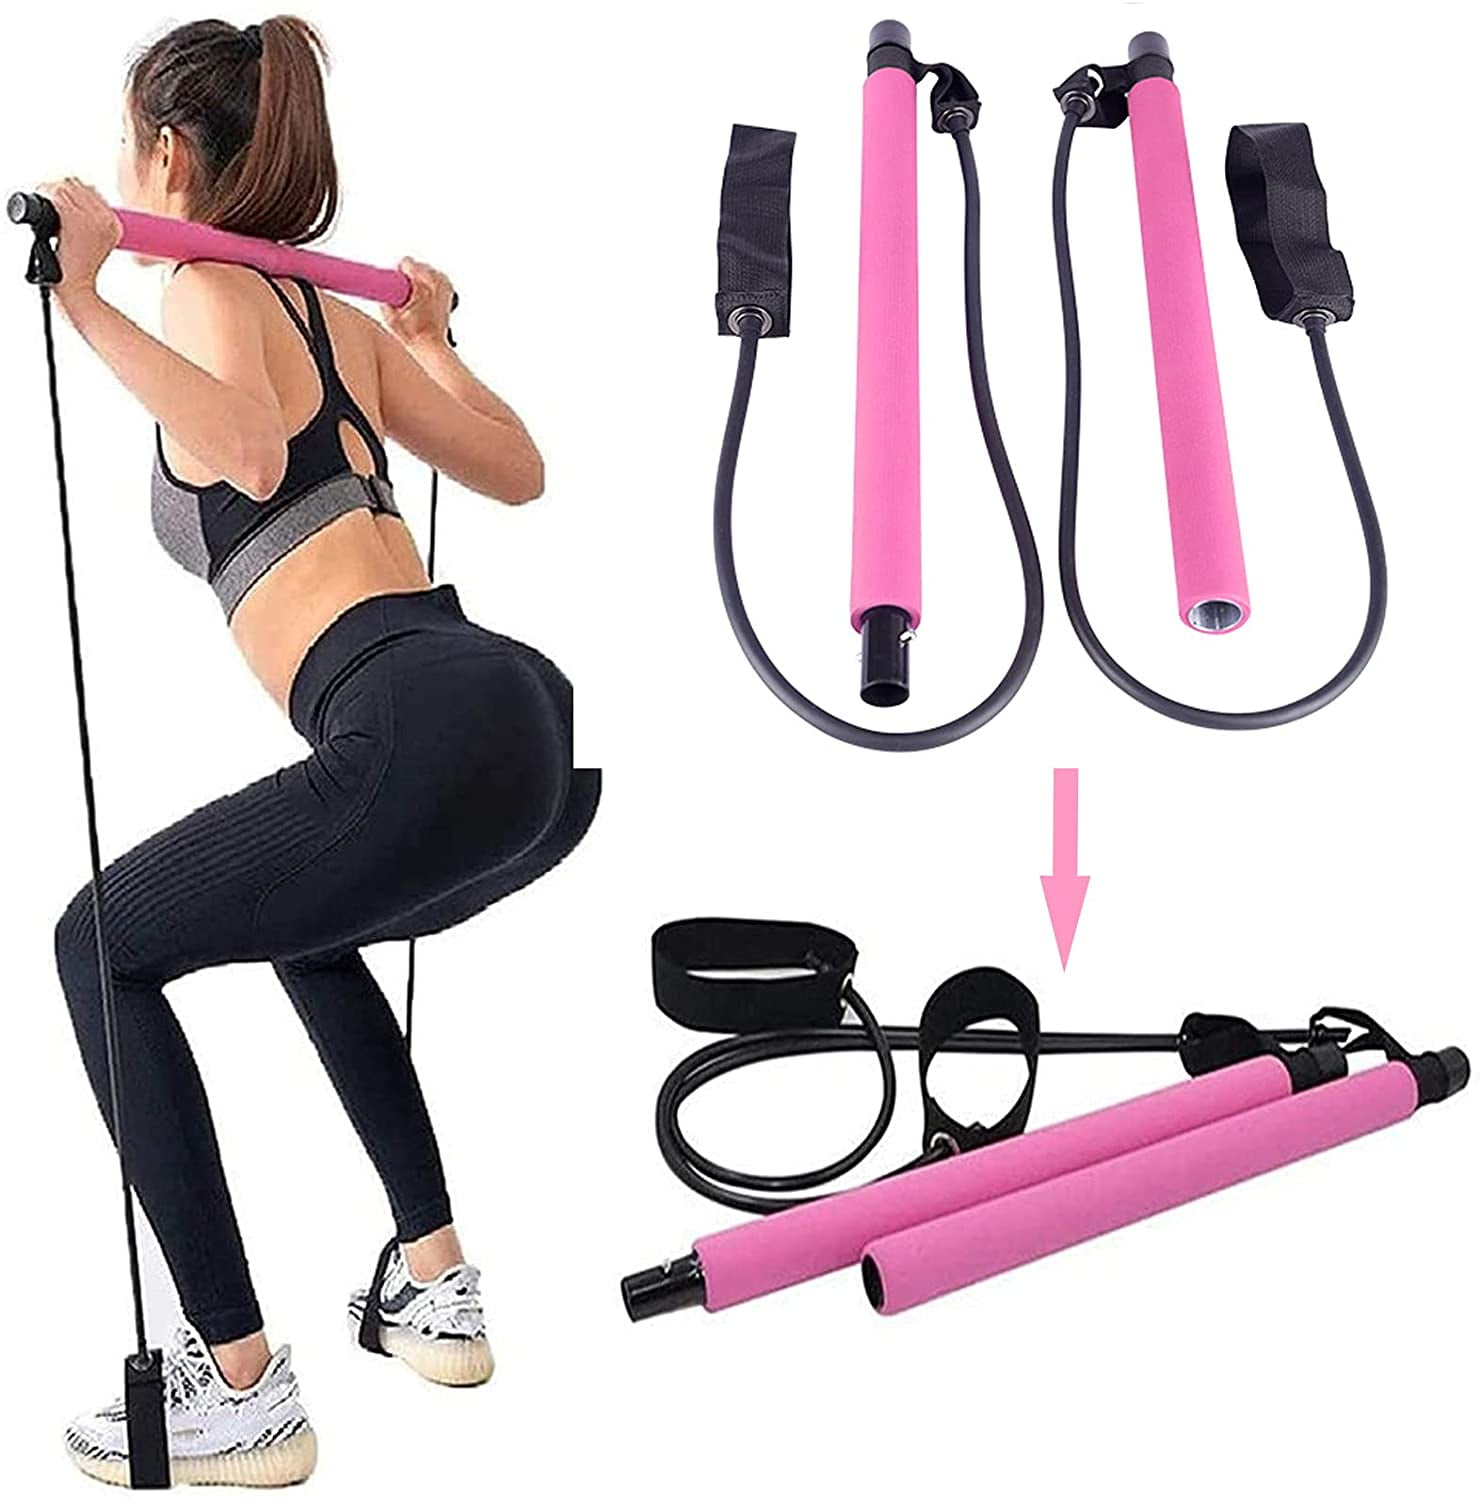 Workout Resistance Band Fitness Gadgets Stretch Women Resistance